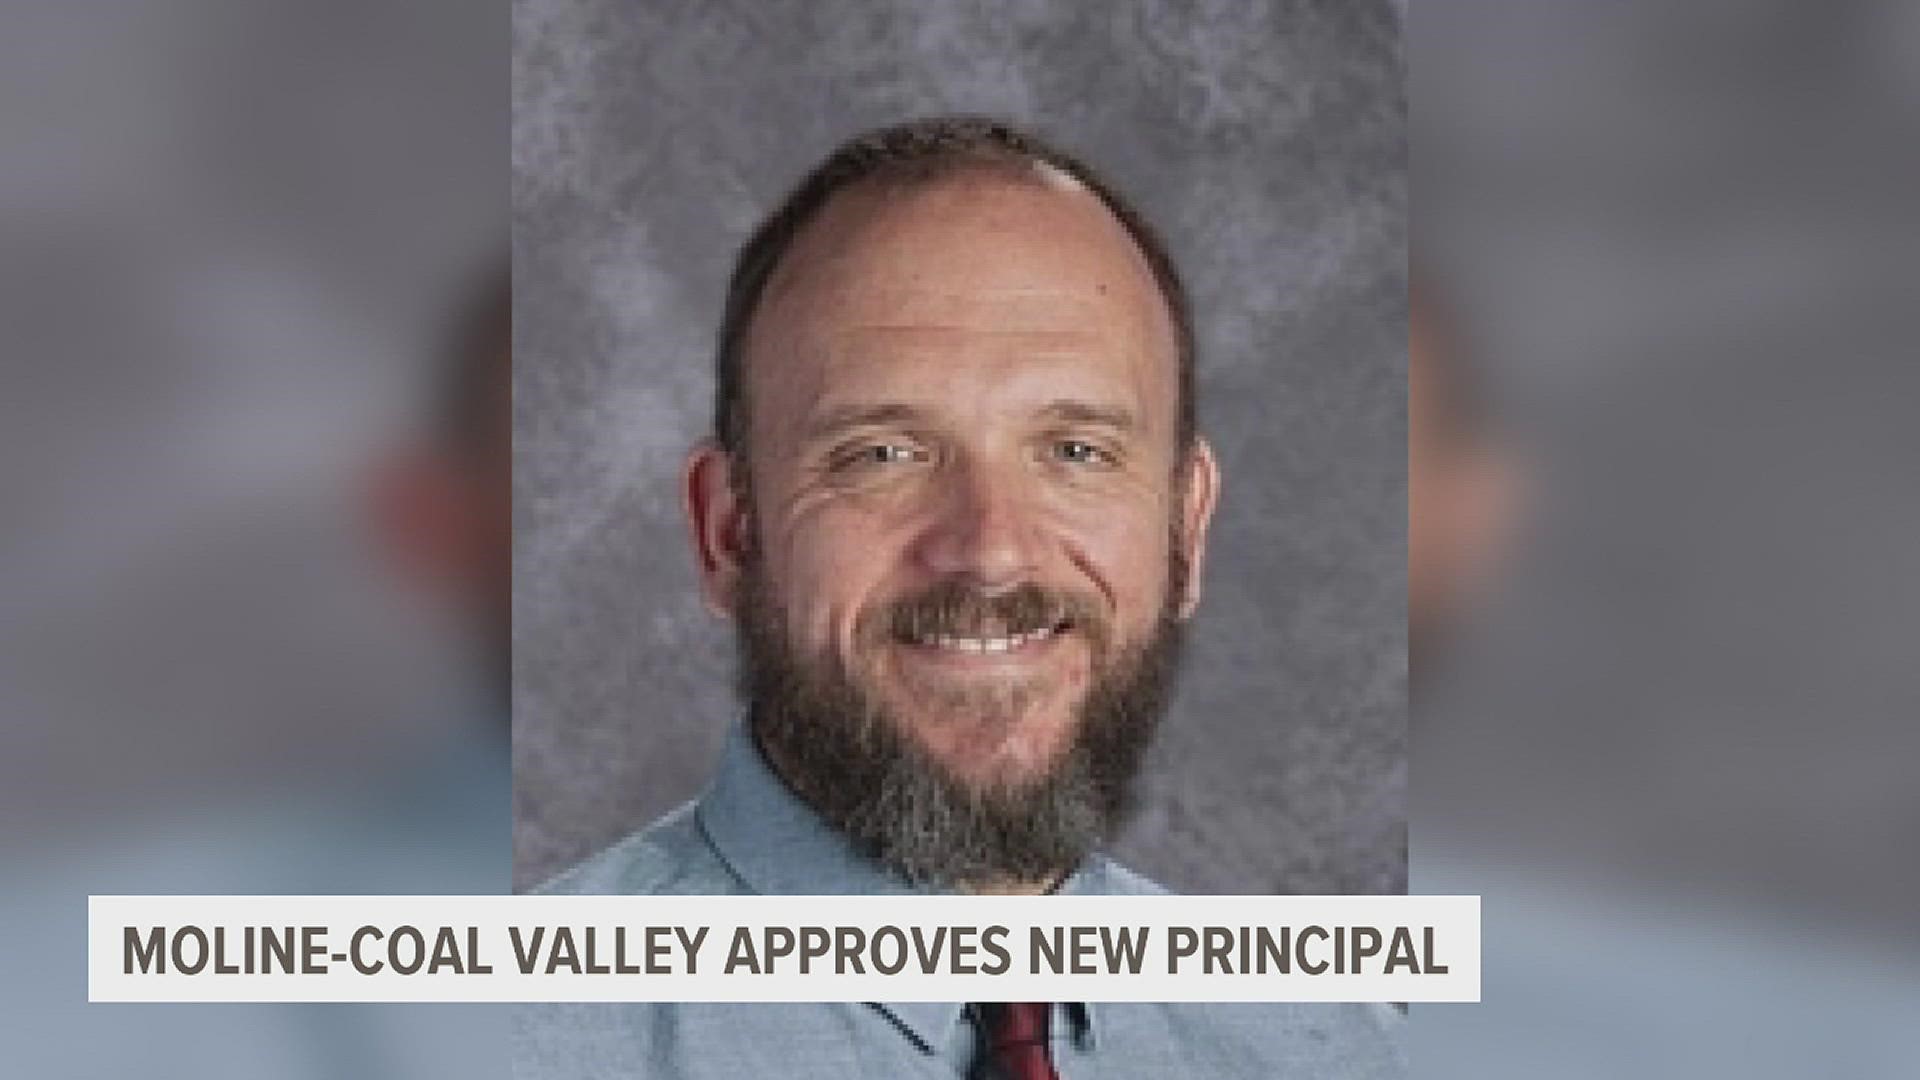 The Moline-Coal Valley Board approved the appointment of Christopher Moore, a Moline High administrative veteran, to the principal's seat.